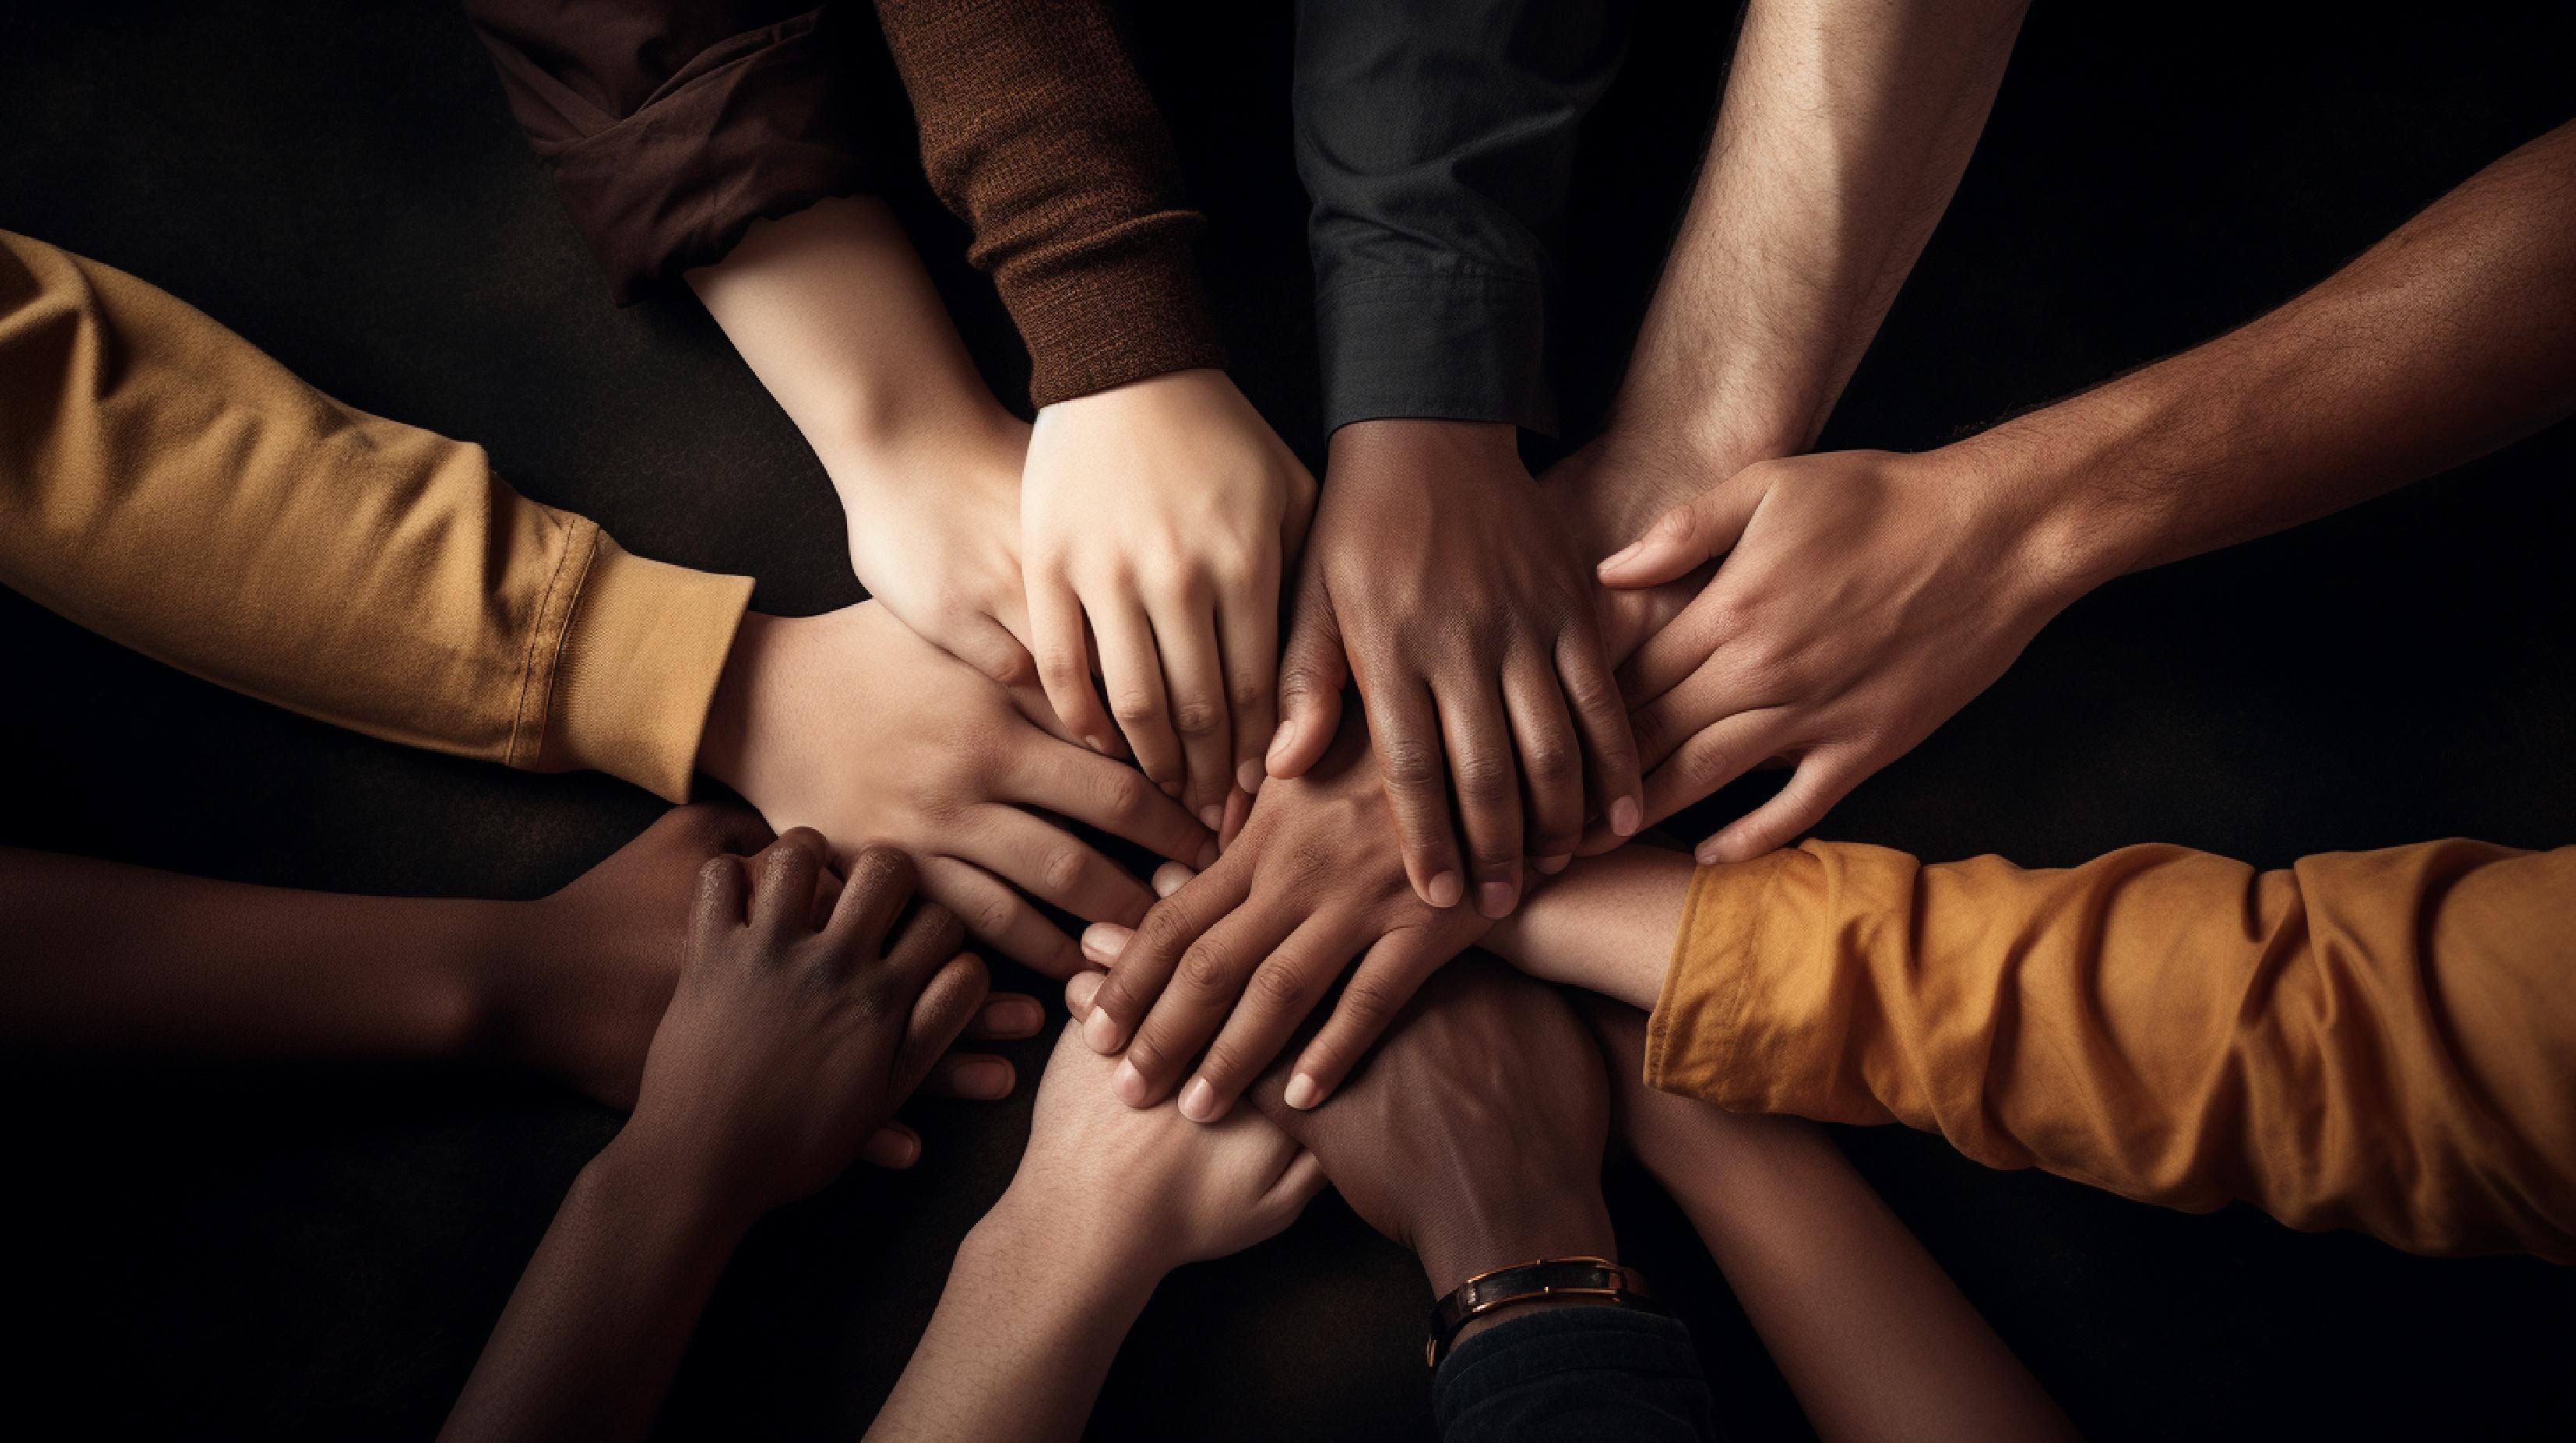 Hands of all different skin colours reach in to form a circle meeting in the middle